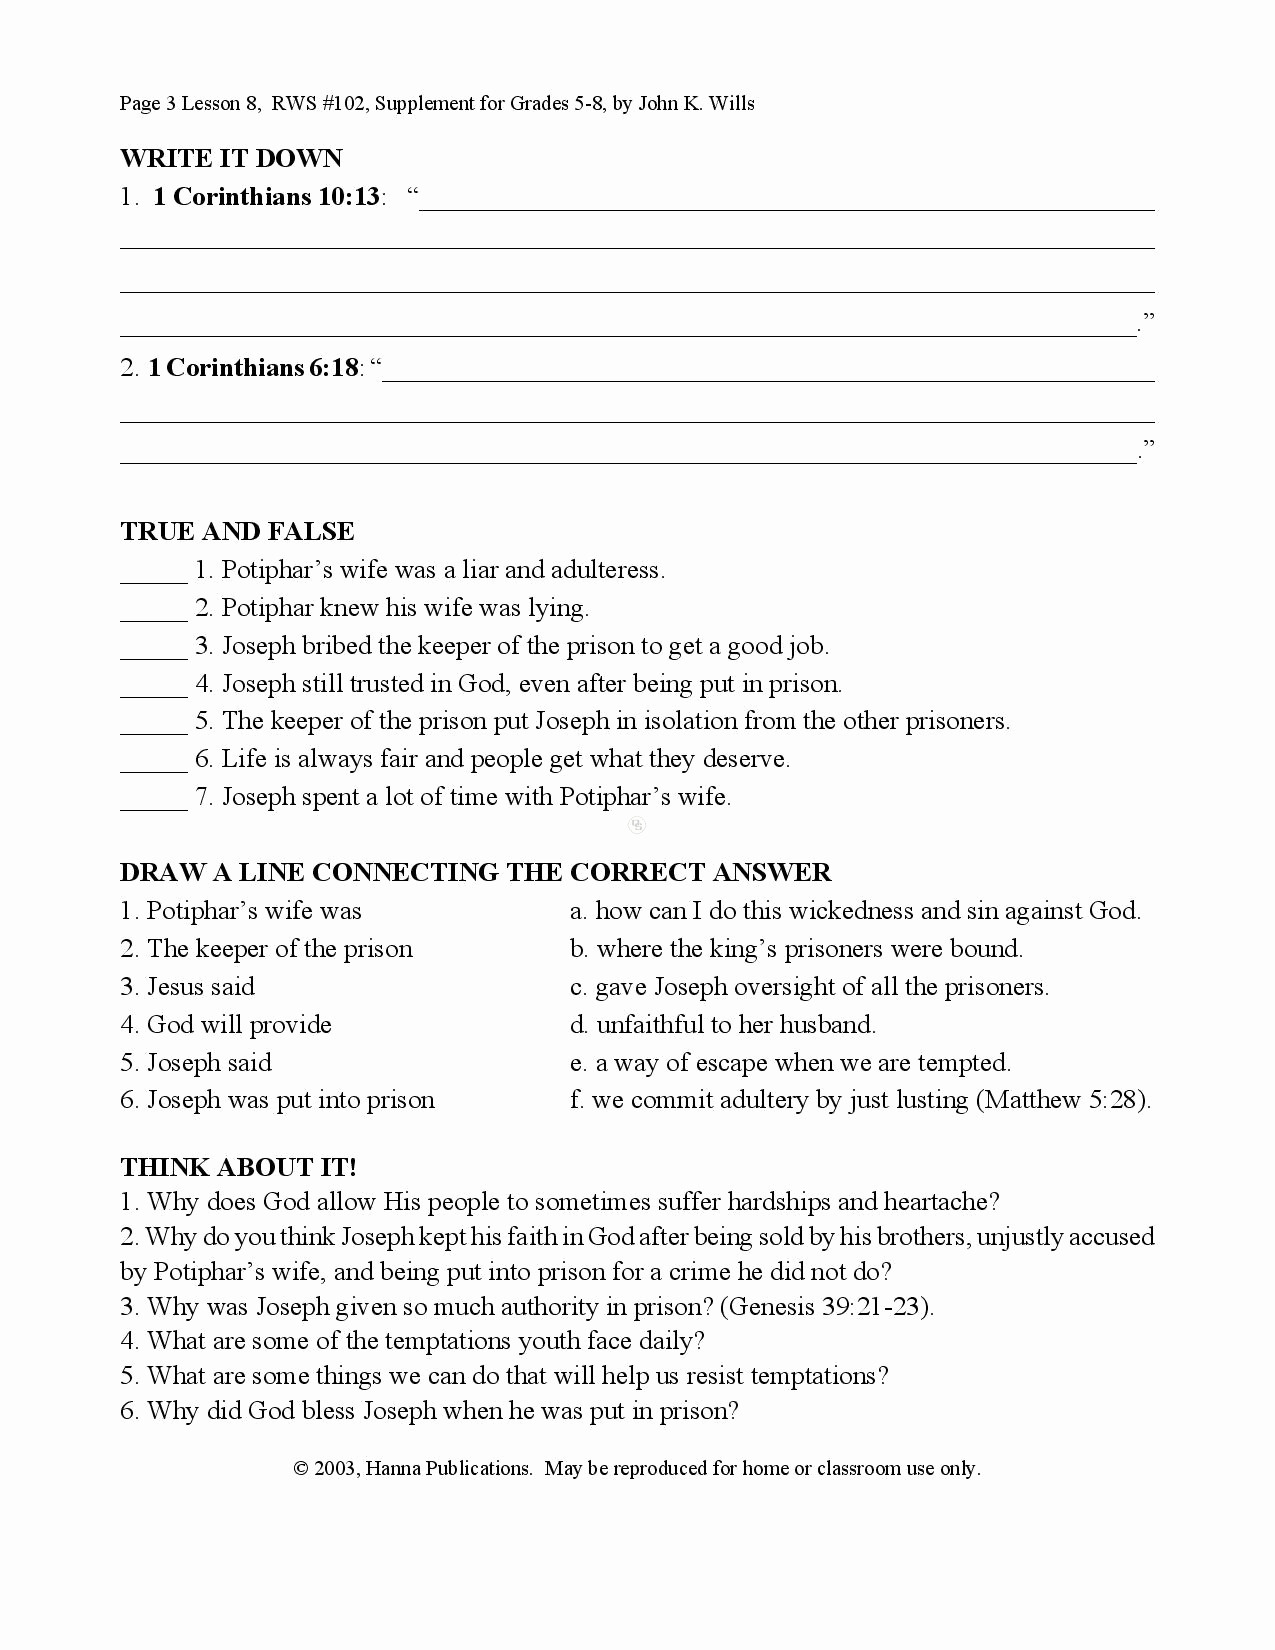 bible-study-worksheets-for-adults-inspirational-free-db-excel